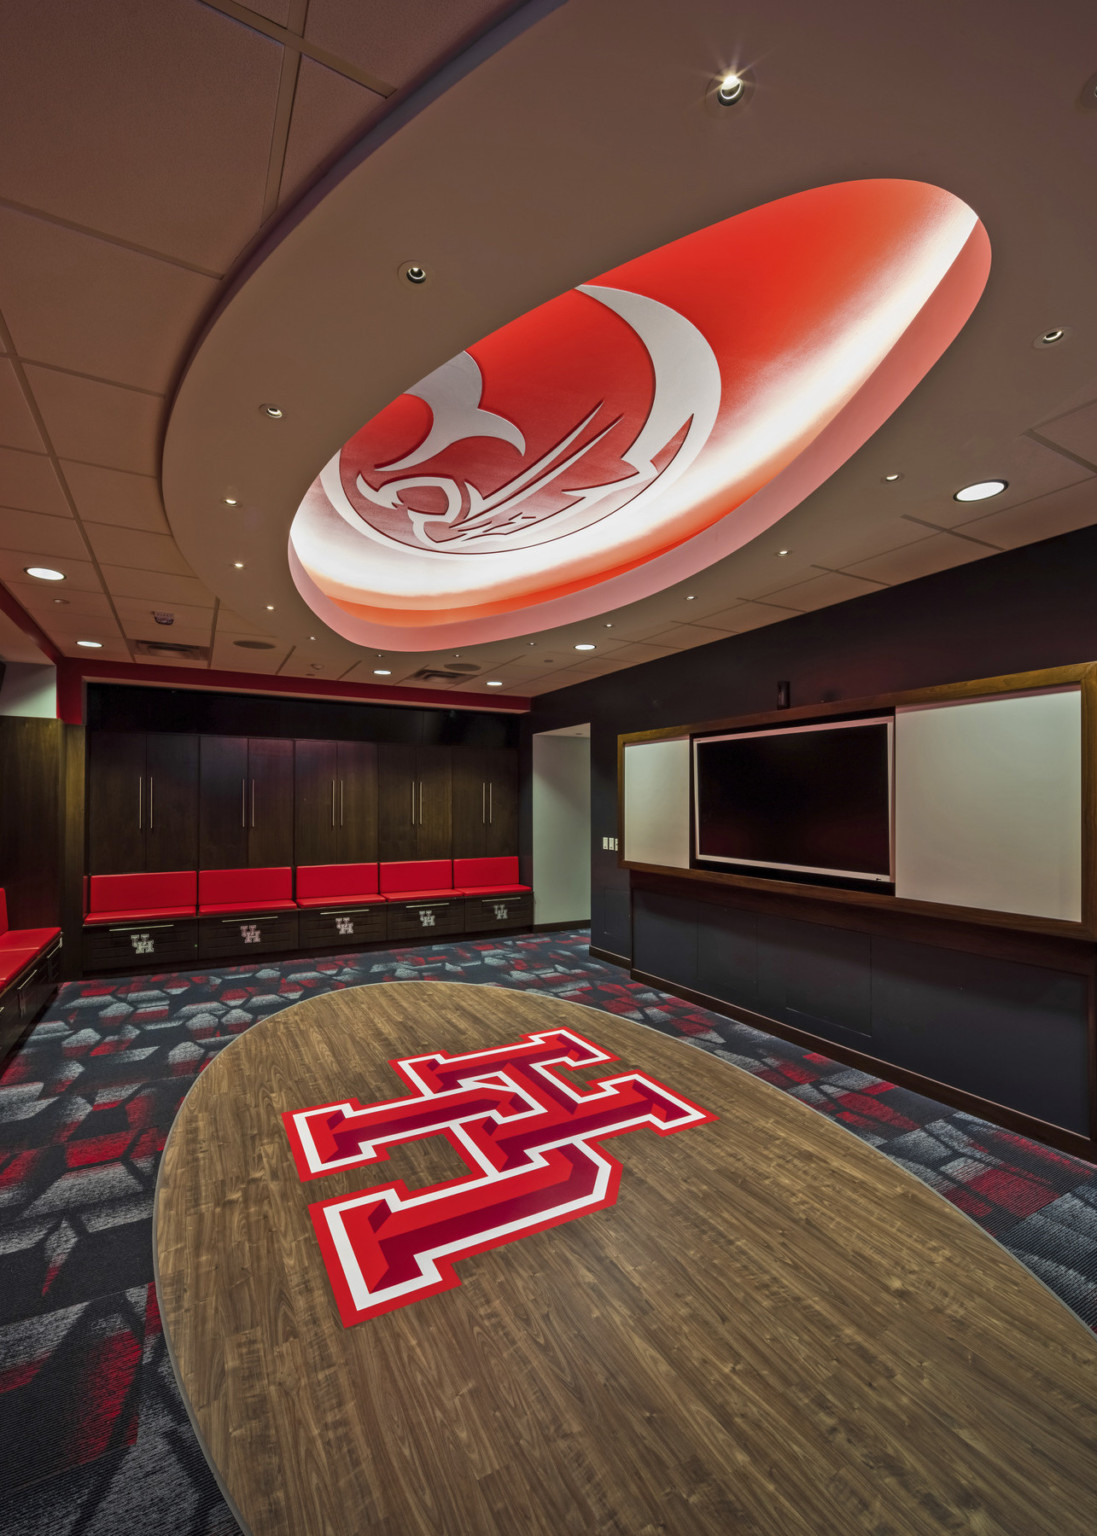 Locker room with wood lockers and red seats. Oval floor panel with UH logo mirrored by recessed ceiling with mascot image